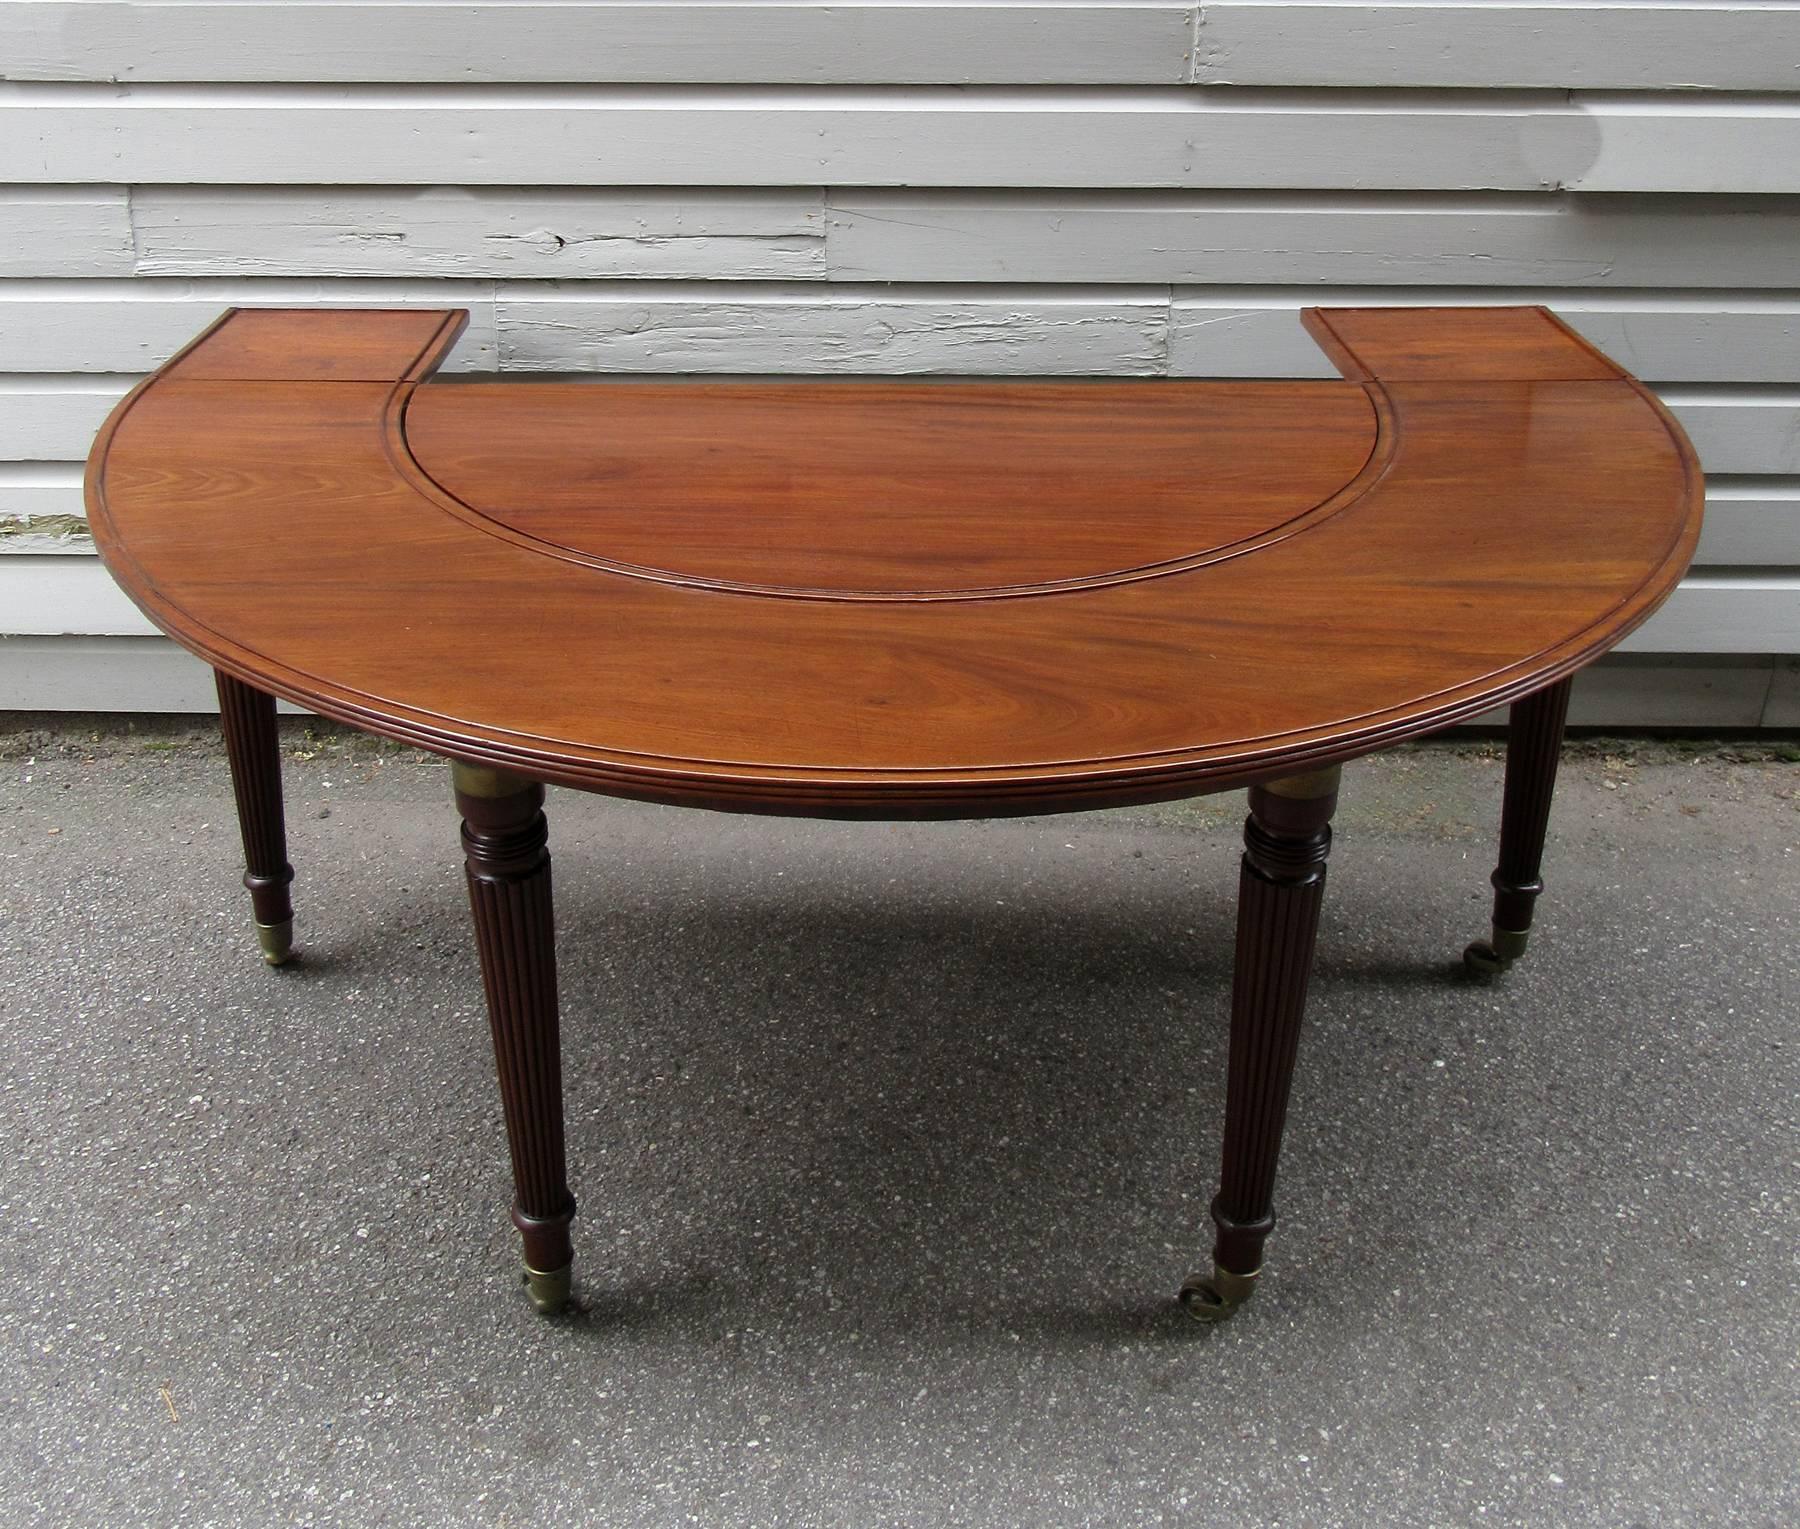 An English Regency mahogany social table, circa 1810, in classical Gillows design featuring removable reeded legs with brass cuffs and original cup casters. A similar table is featured in the book 